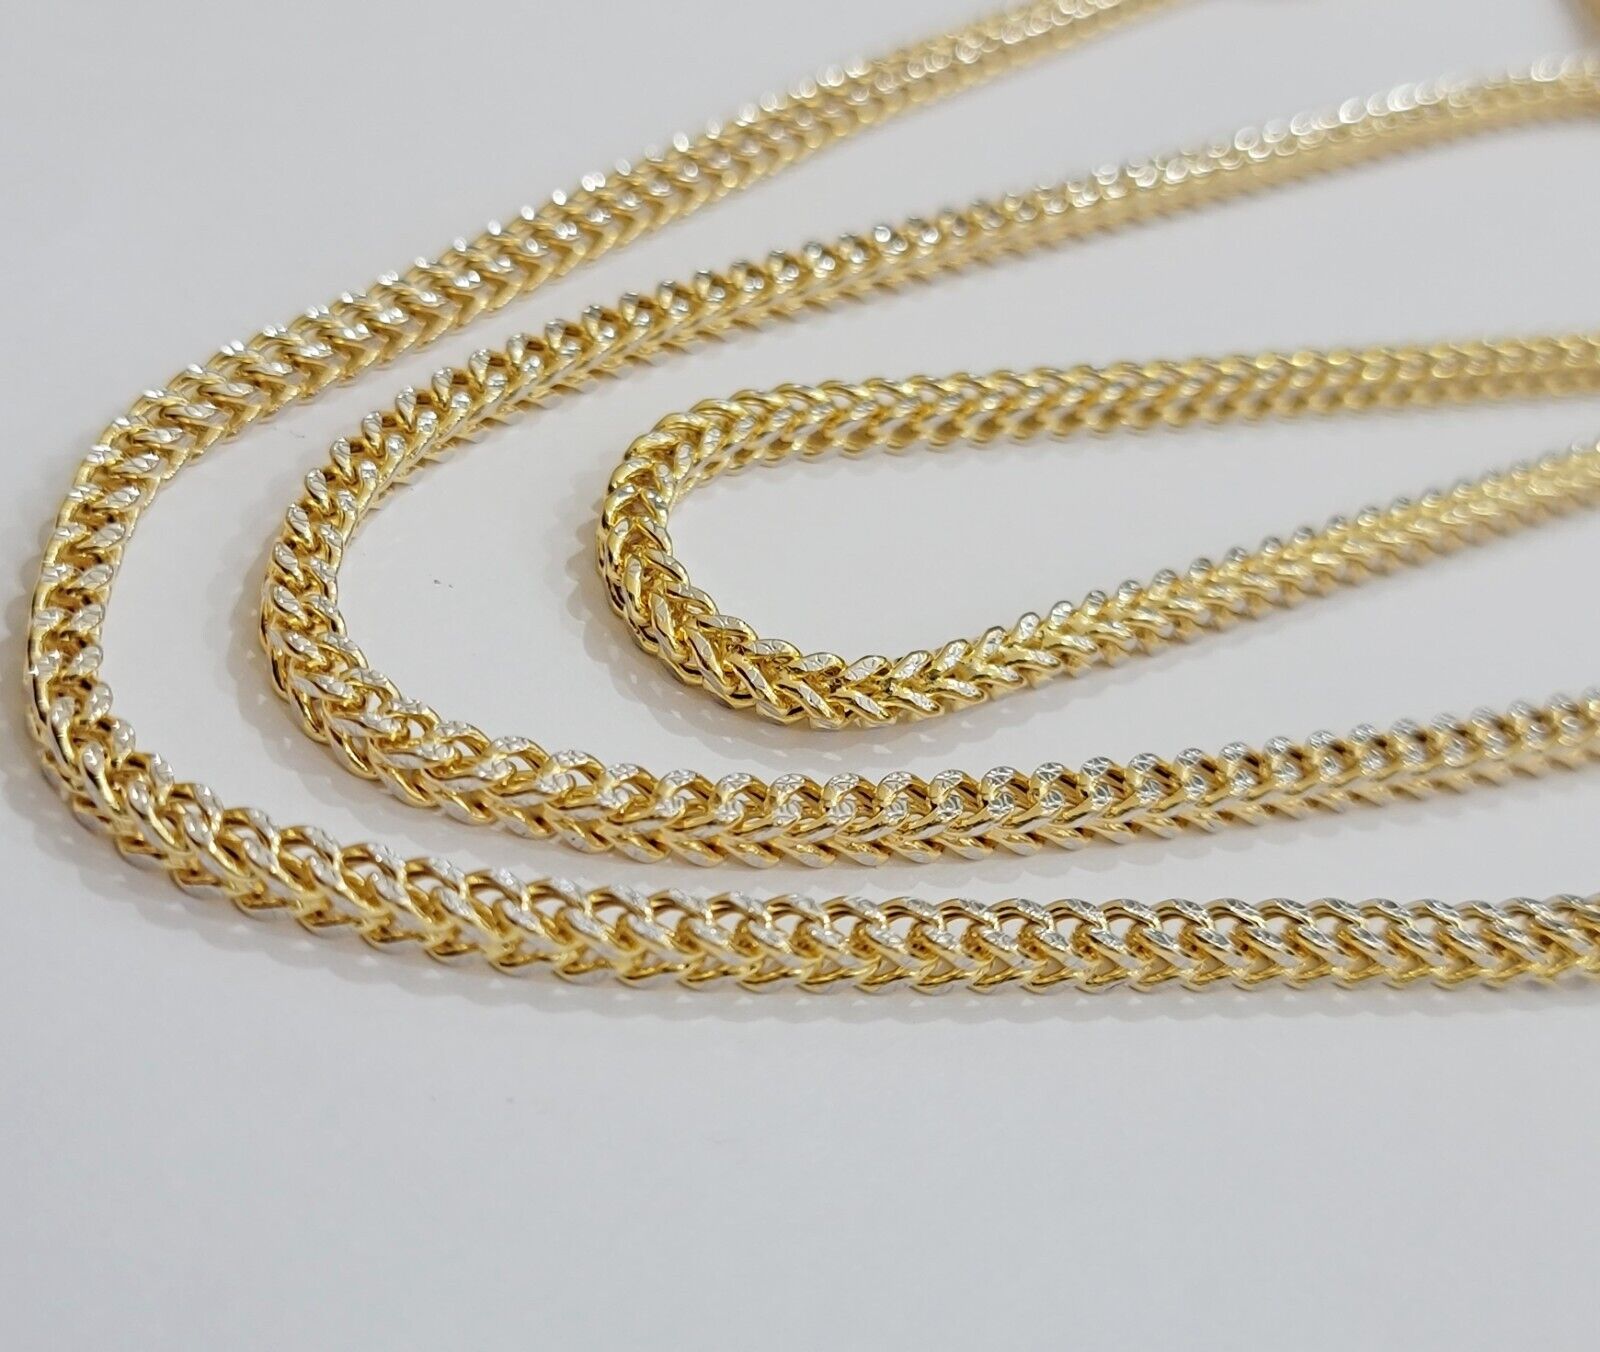 Real 14k Gold Chain Franco 3.5mm Necklace Diamond cut 20" Short 14kt Yellow Gold